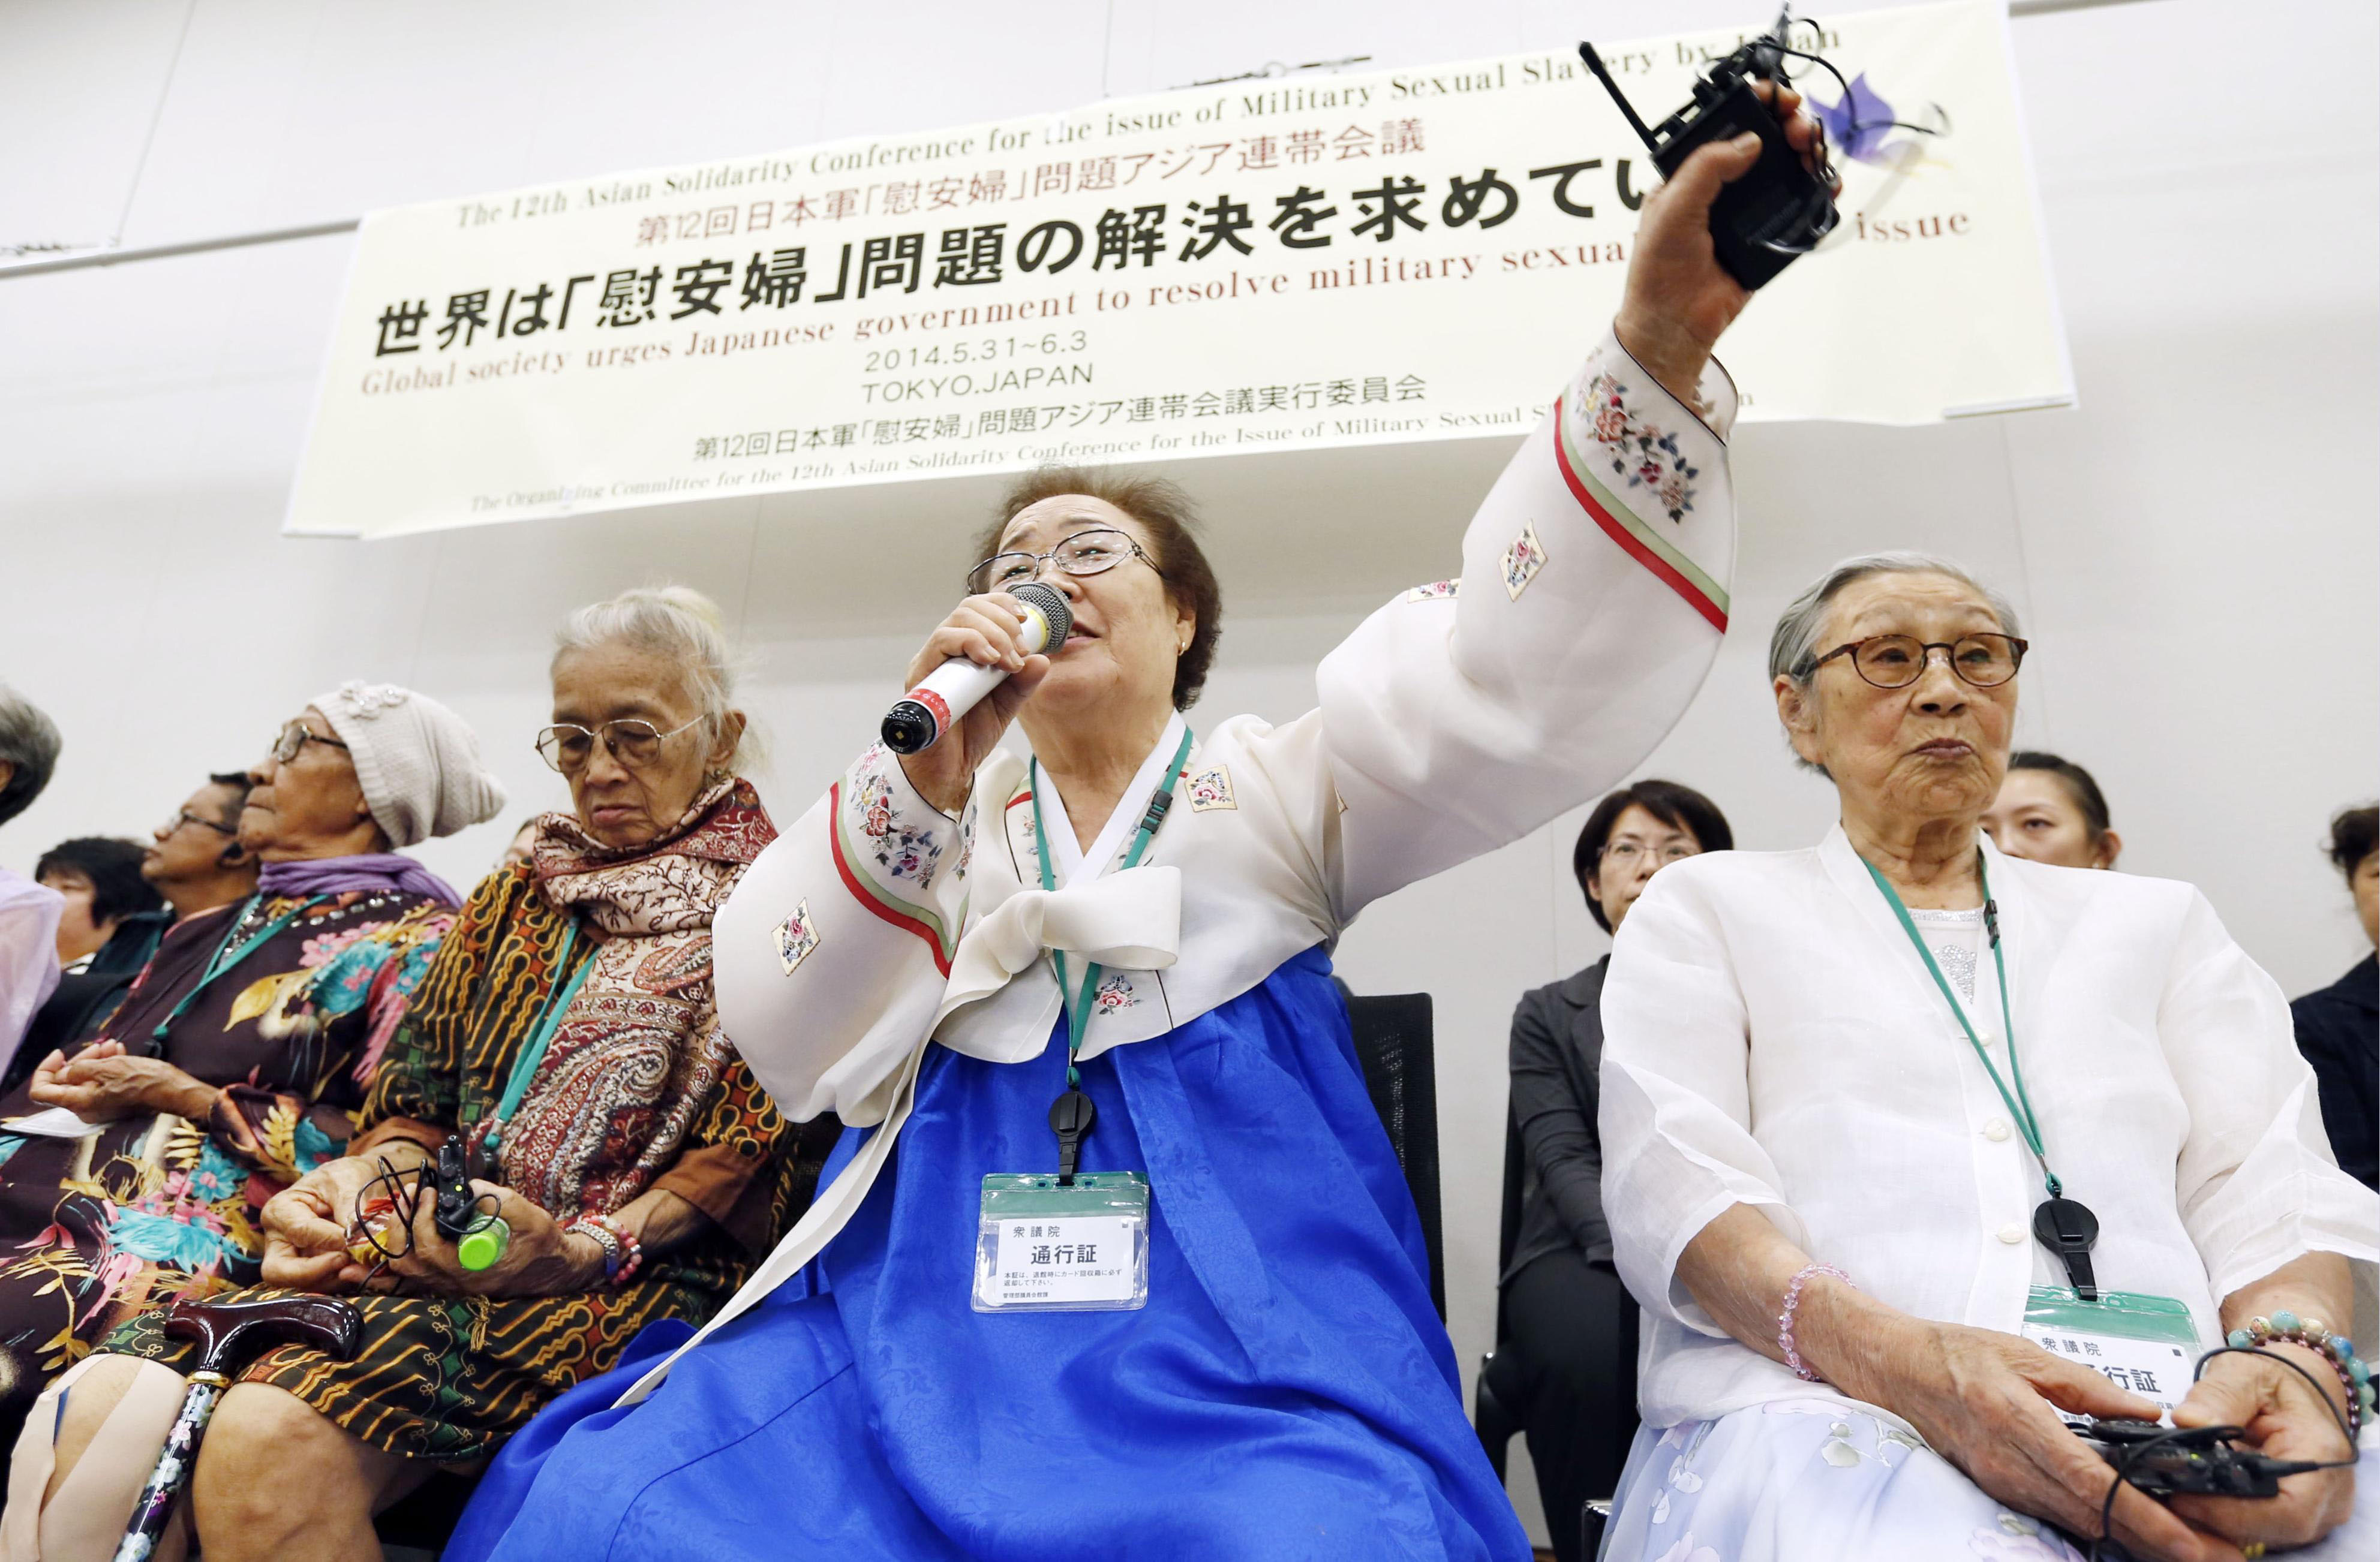 Global concern: Korean, Filipino and Indonesian former 'comfort women' speak at a news conference in Tokyo in June 2014 after a meeting with their supporters. | KYODO